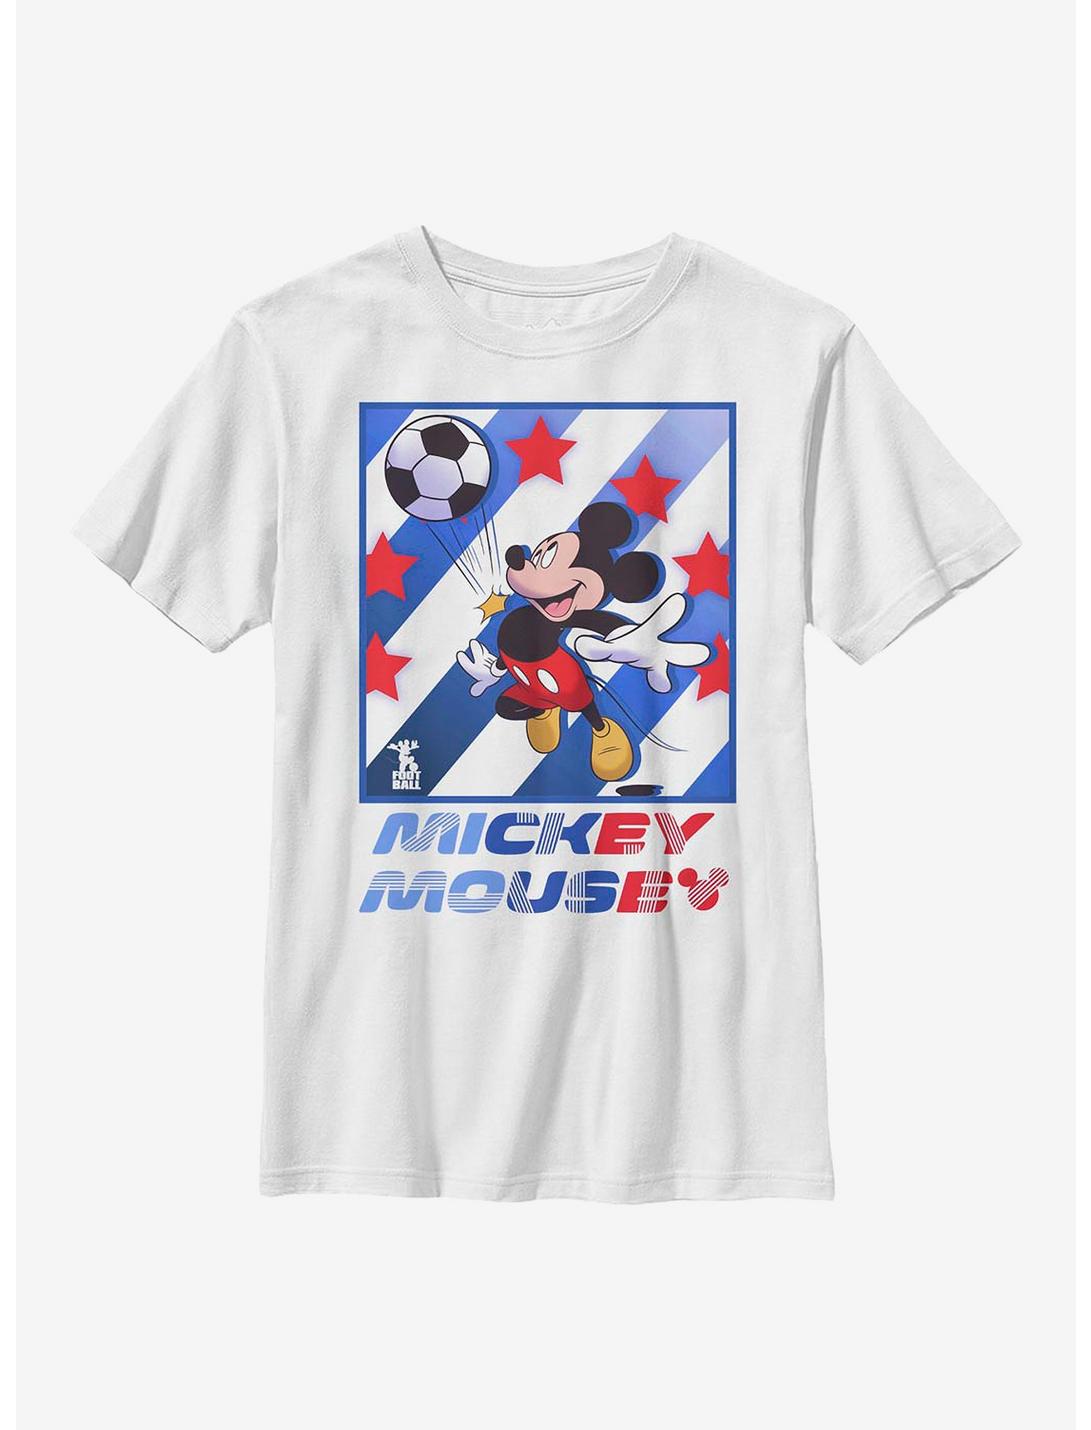 Disney Mickey Mouse Football Star Youth T-Shirt, WHITE, hi-res